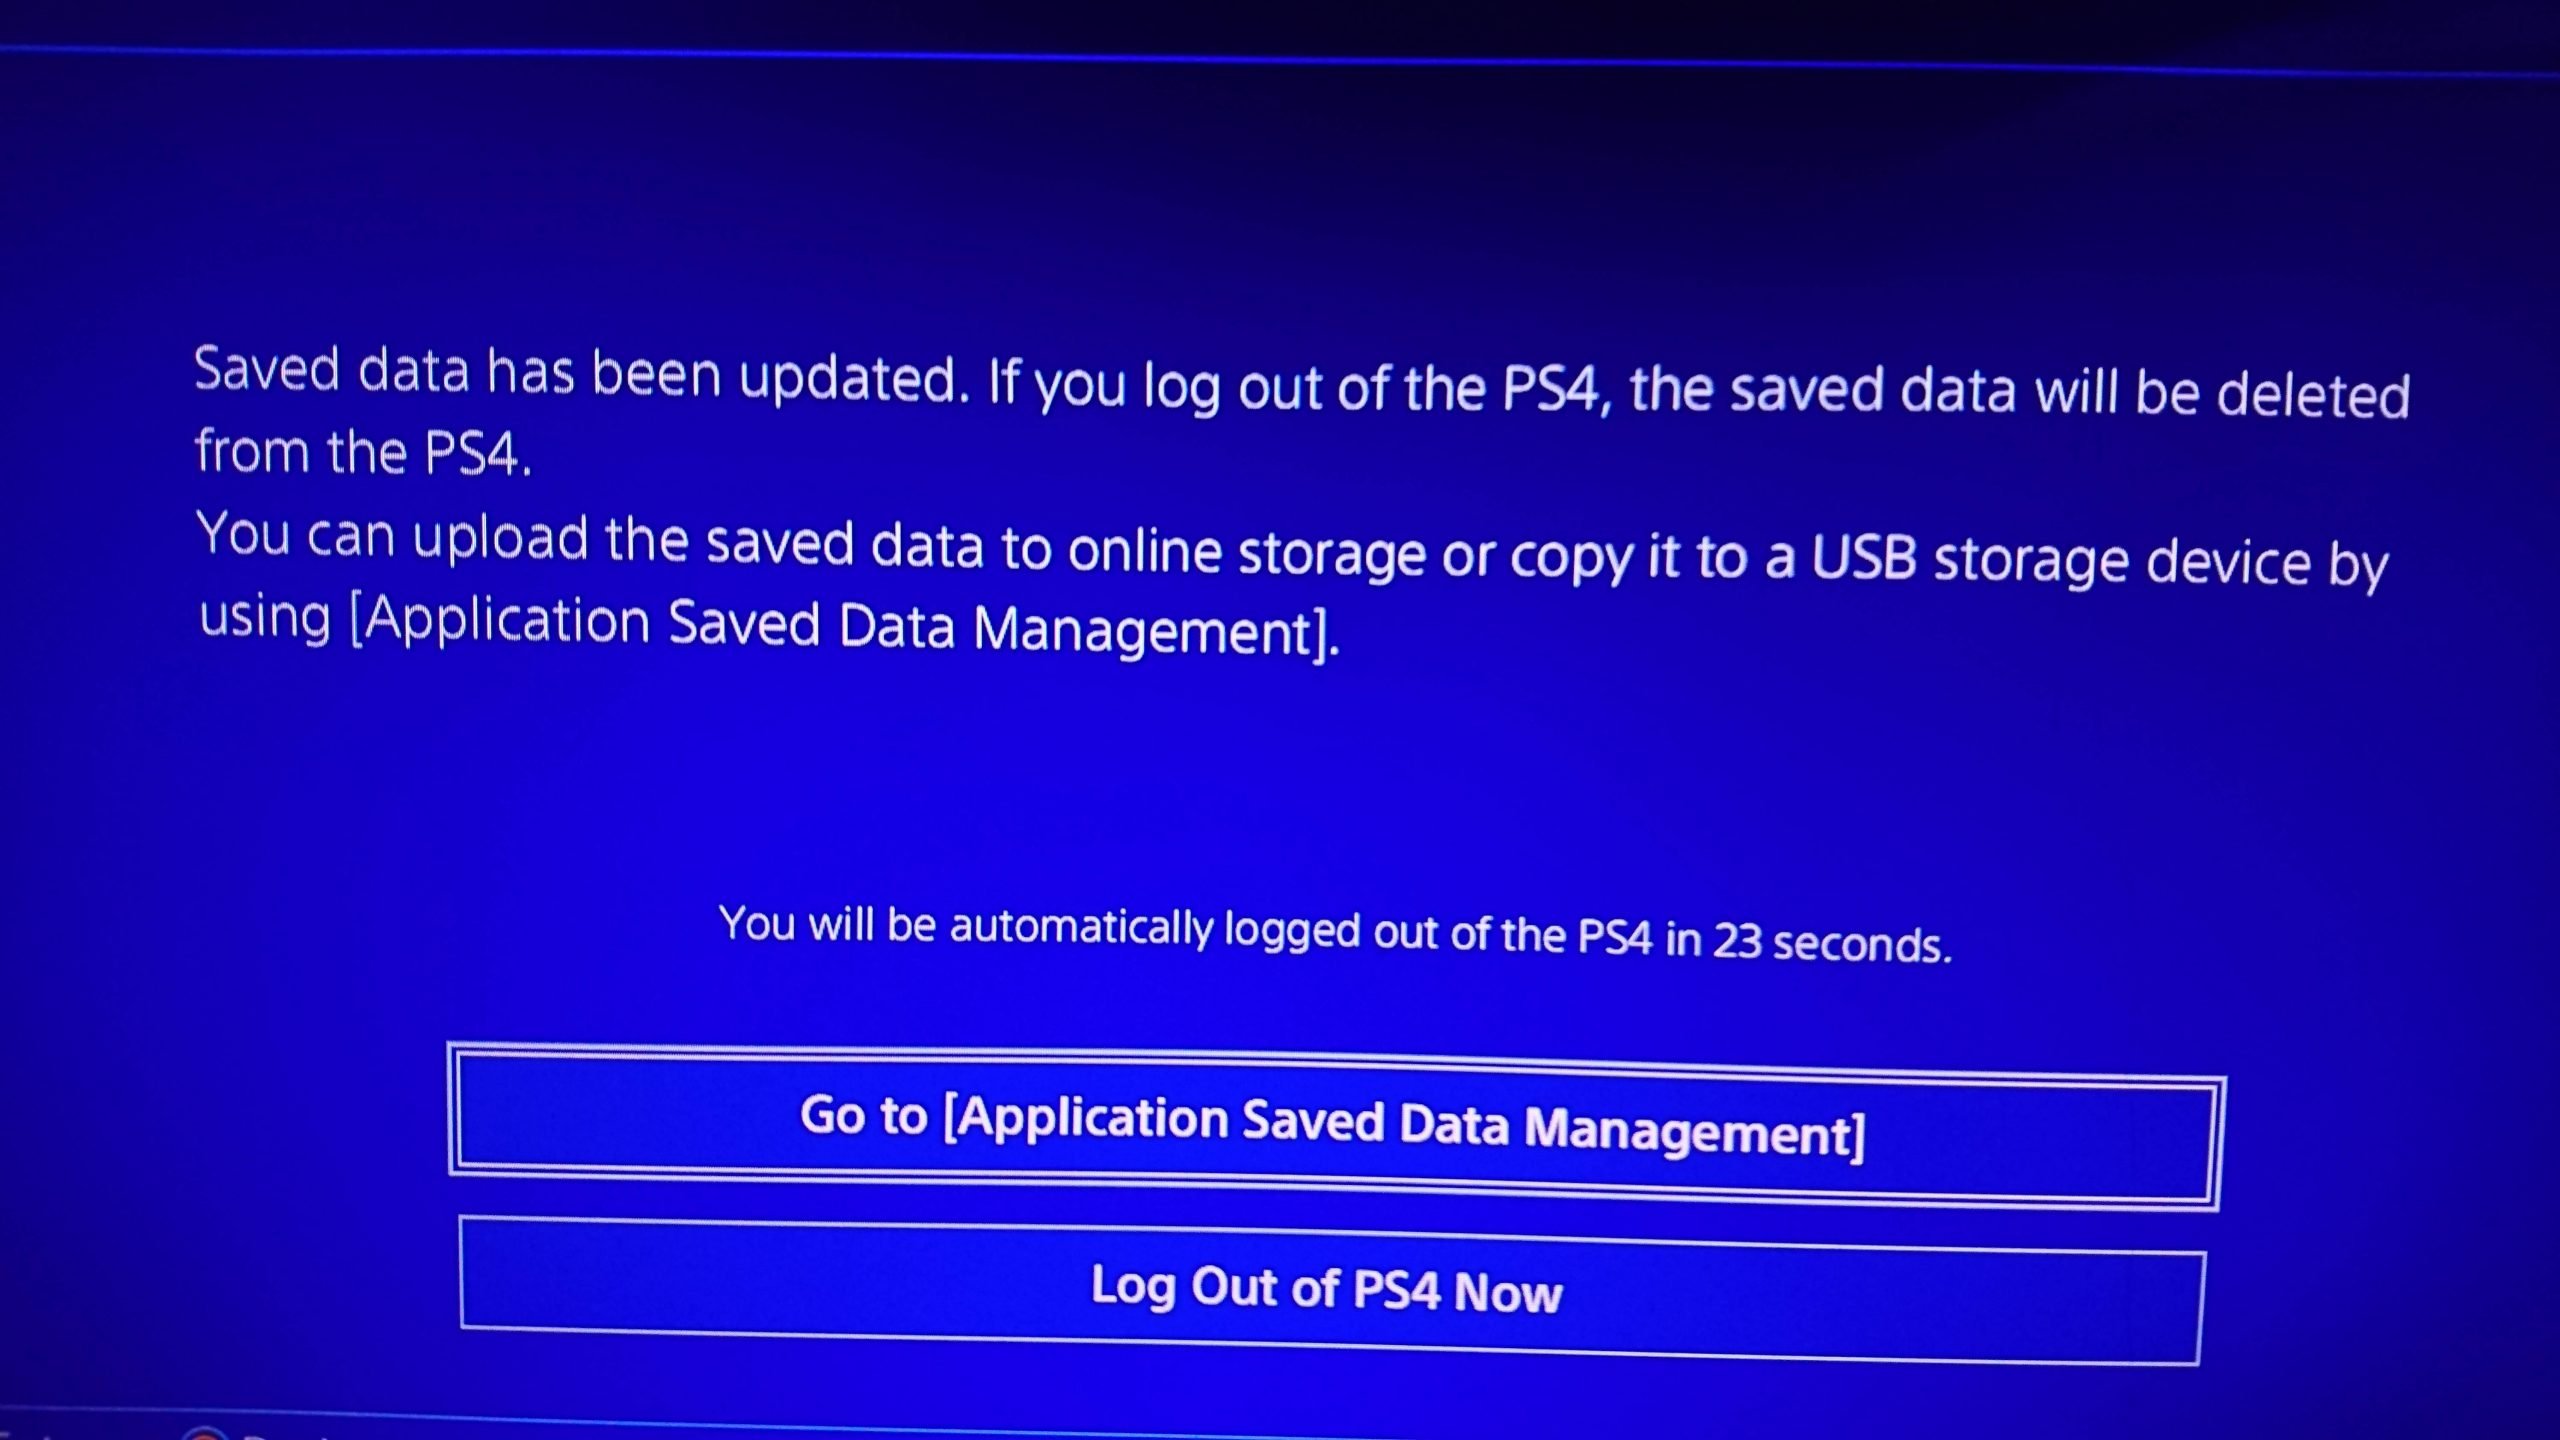 I am trying to log out of my PS4 but a warning shows up ...